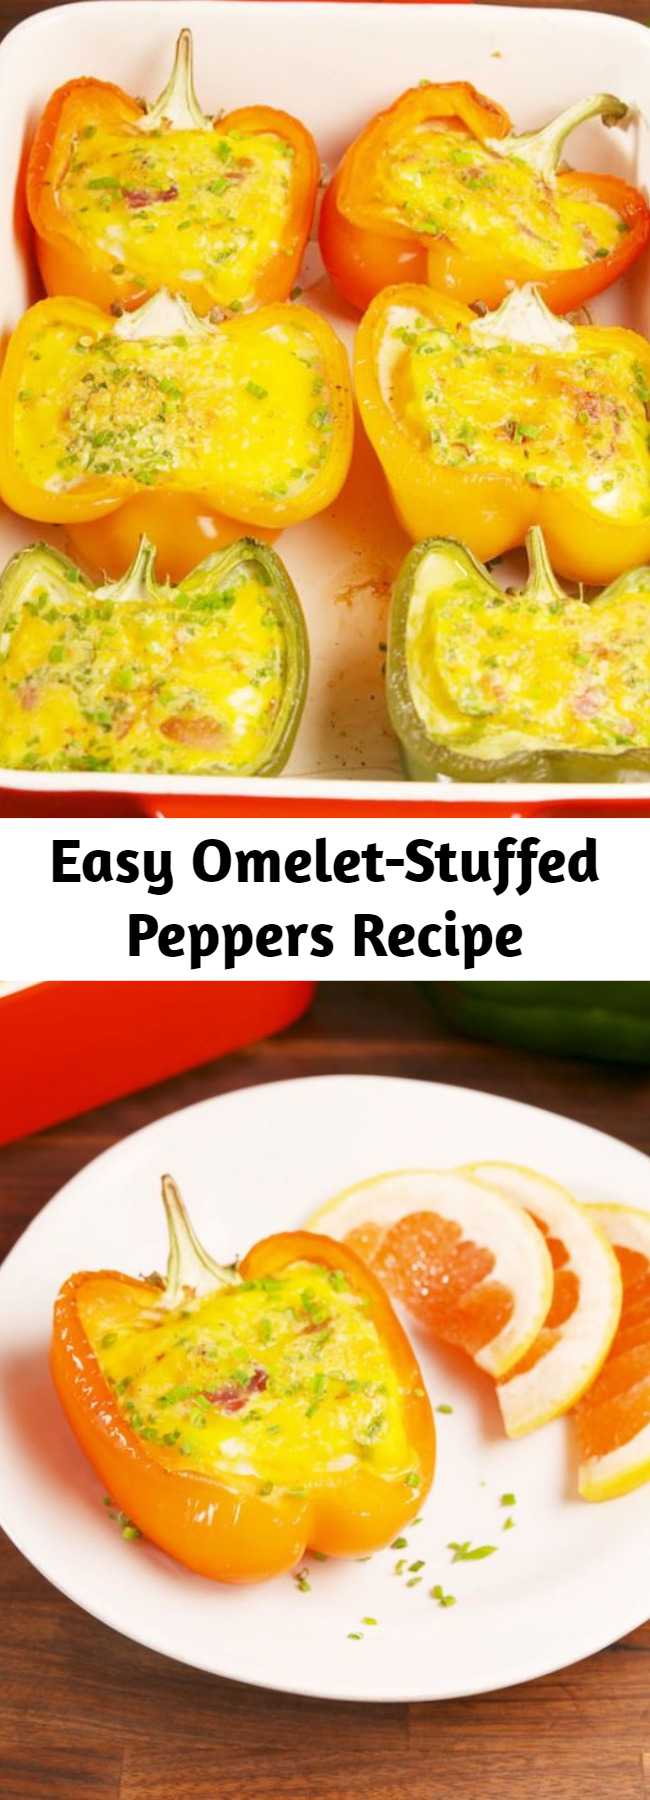 Easy Omelet-Stuffed Peppers Recipe - Omelet stuffed peppers are the keto breakfast you've been dreaming of. #easy #recipes #omelet #lowcarb #keto #ketorecipes #breakfast #brunch #eggs #bellpepper #stuffedpeppers